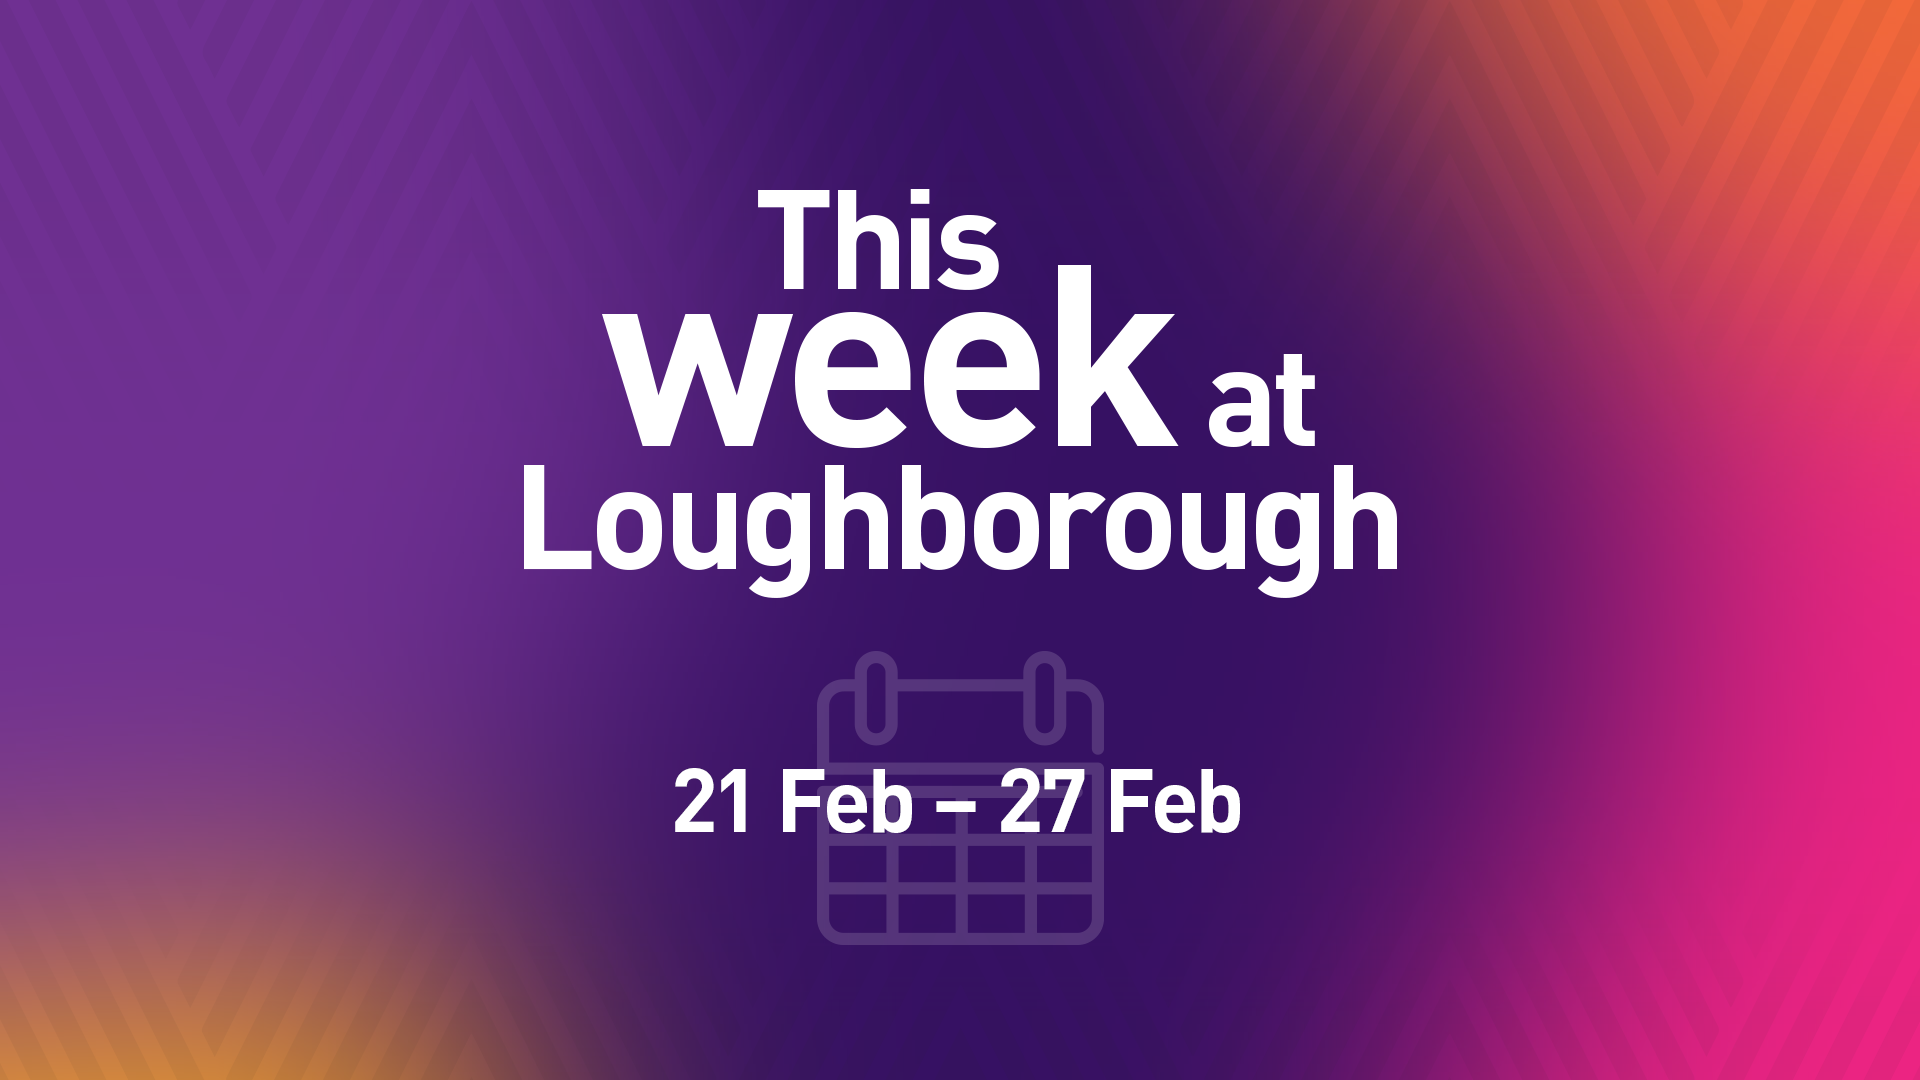 This Week at Loughborough  |  21 February